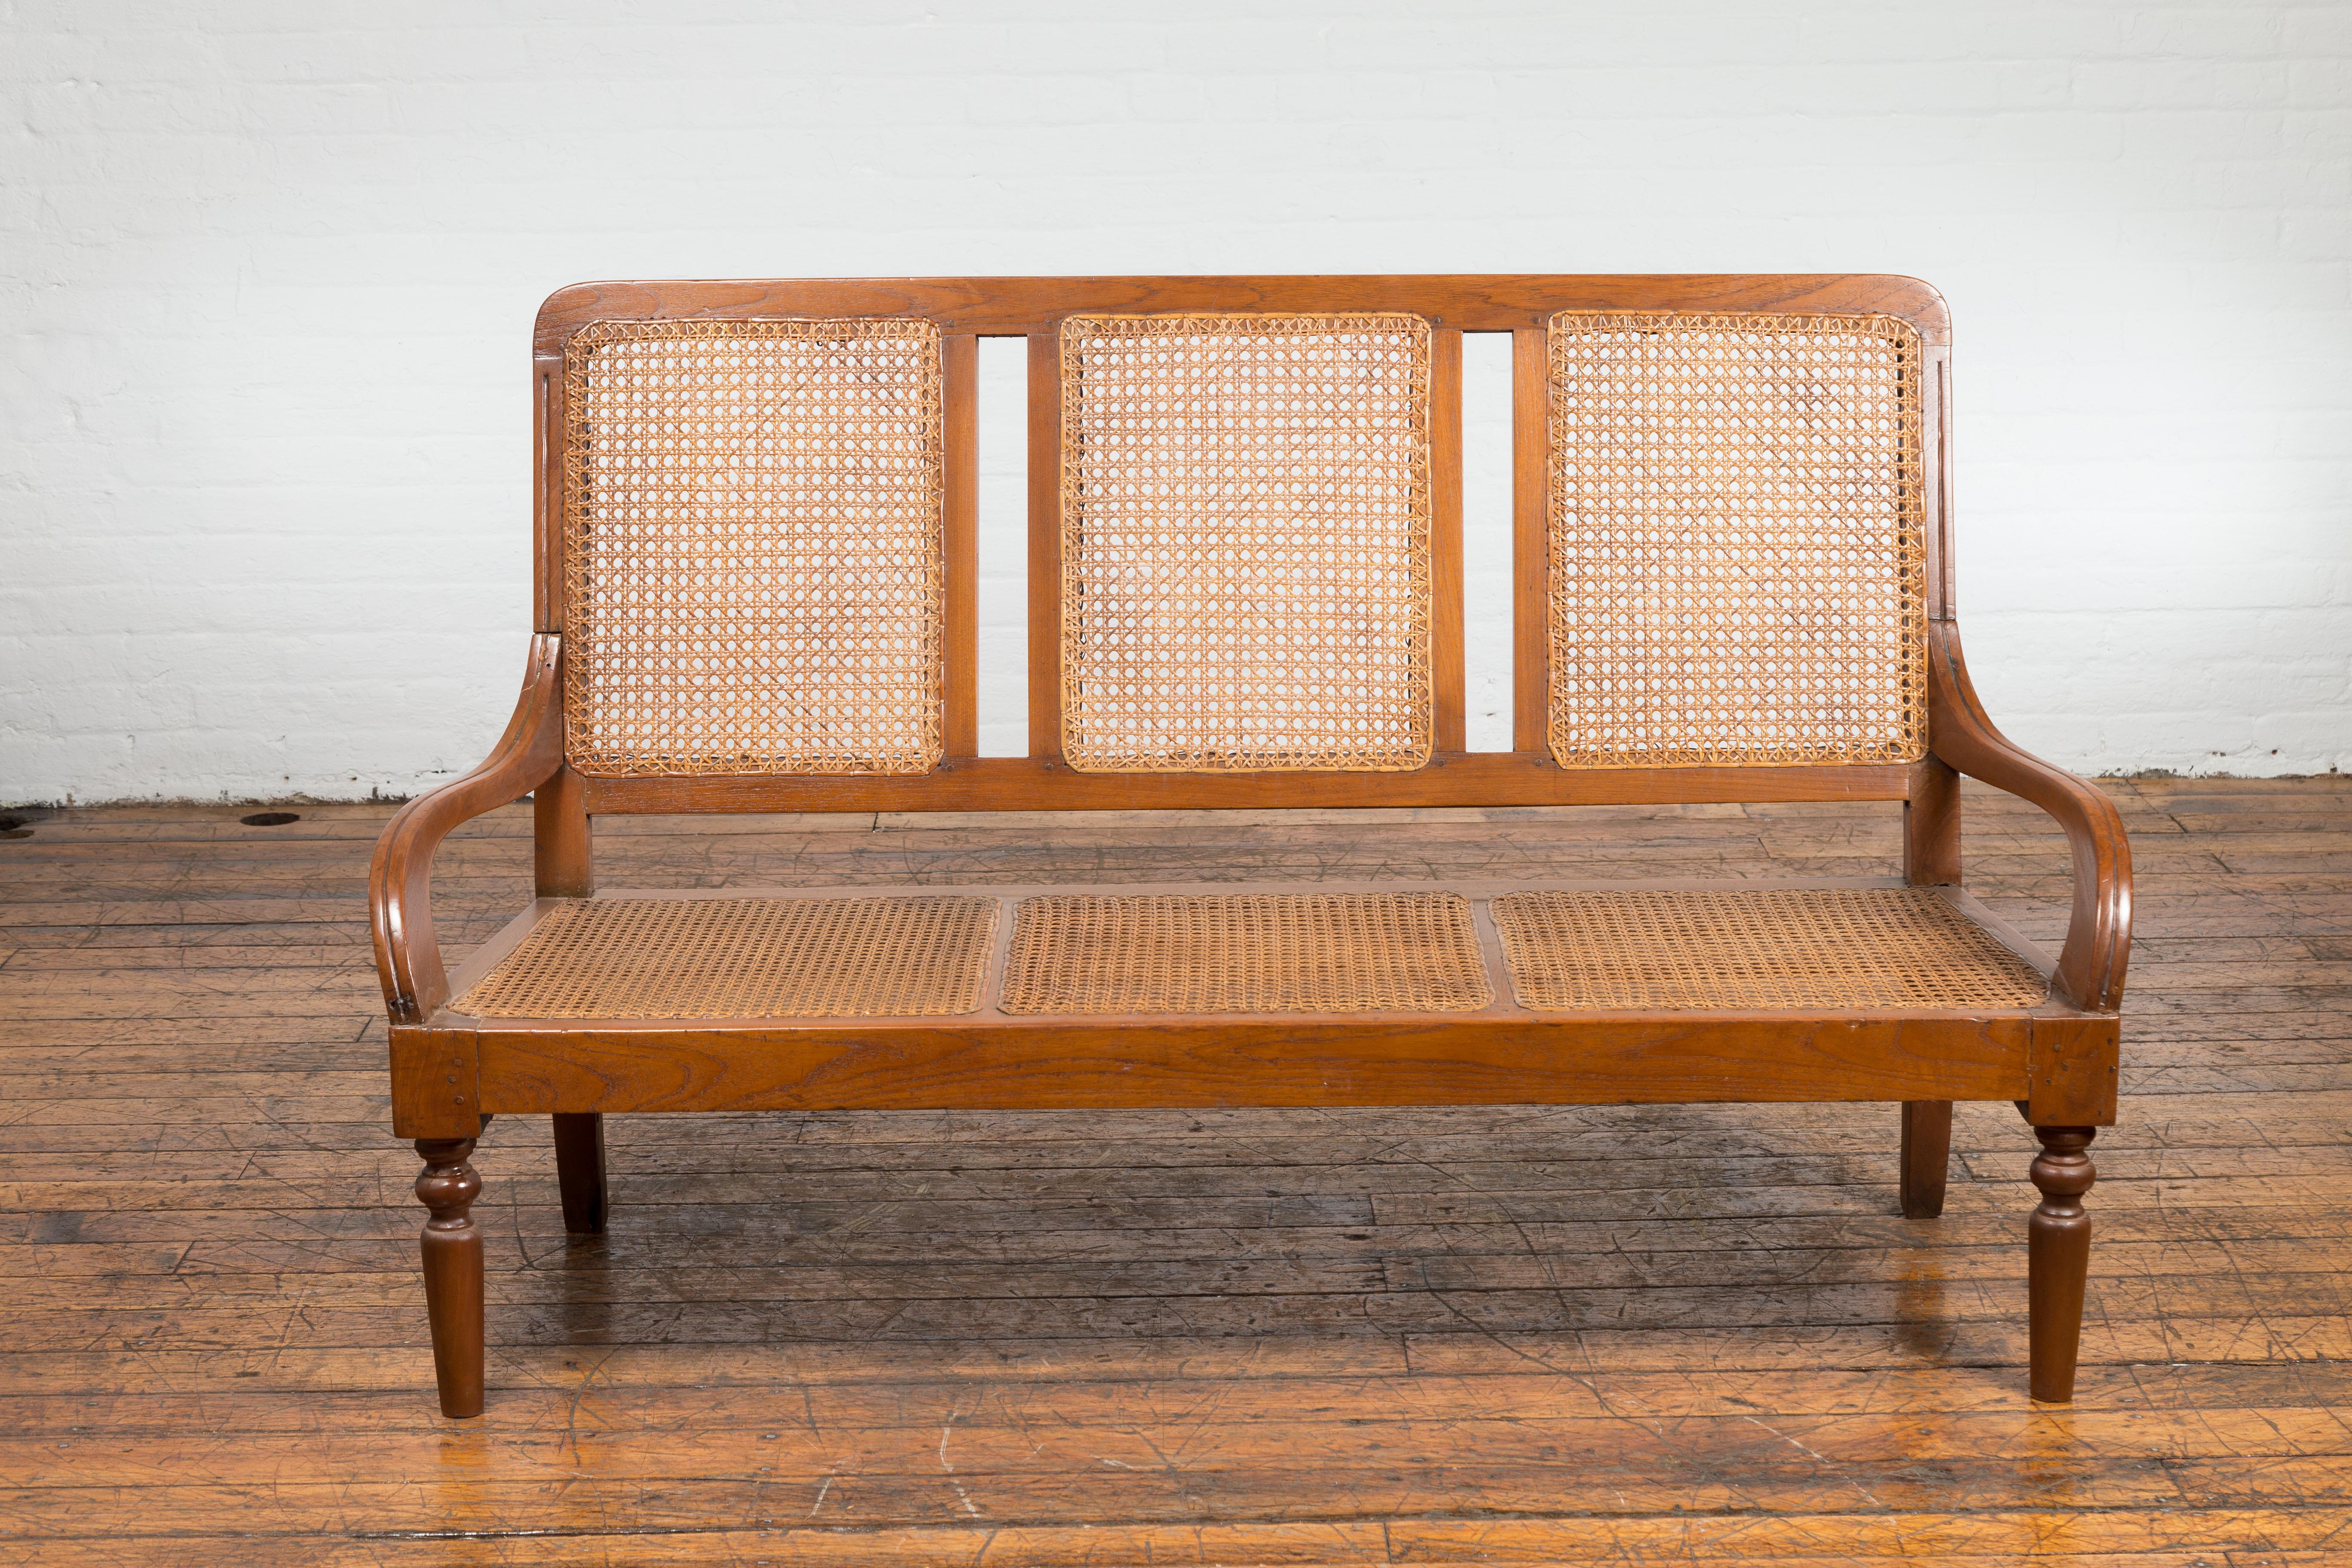 Javanese Woven Rattan Antique Settee For Sale